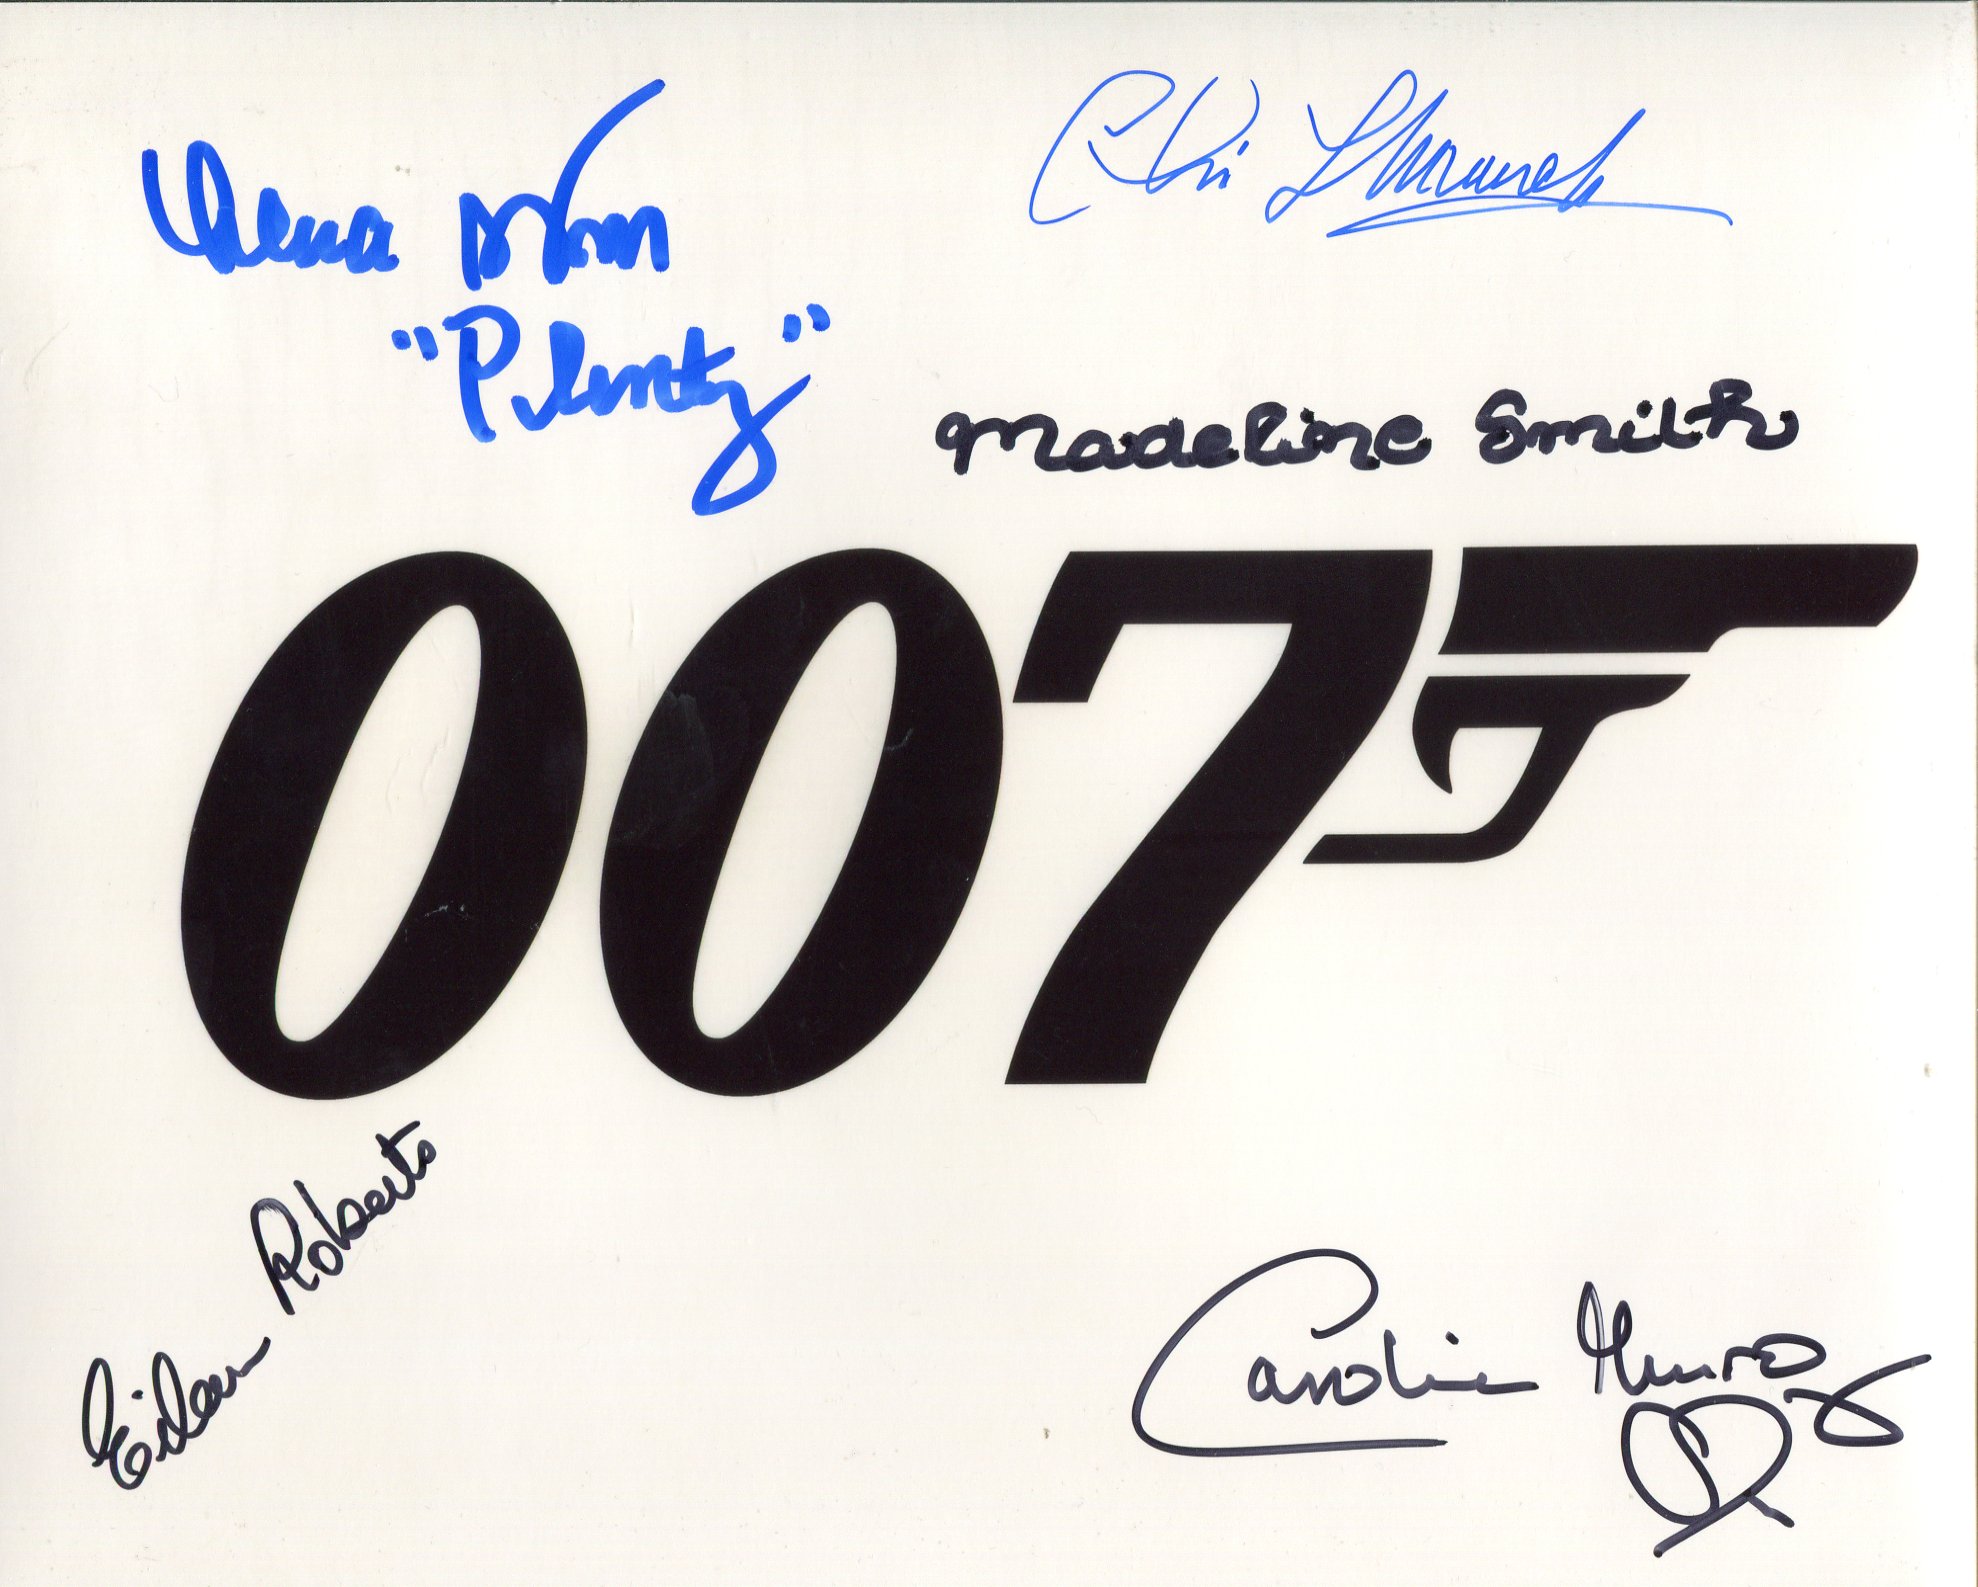 007 James Bond photo signed by FIVE stars who appeared in a Bond movie, these are Madeline Smith,